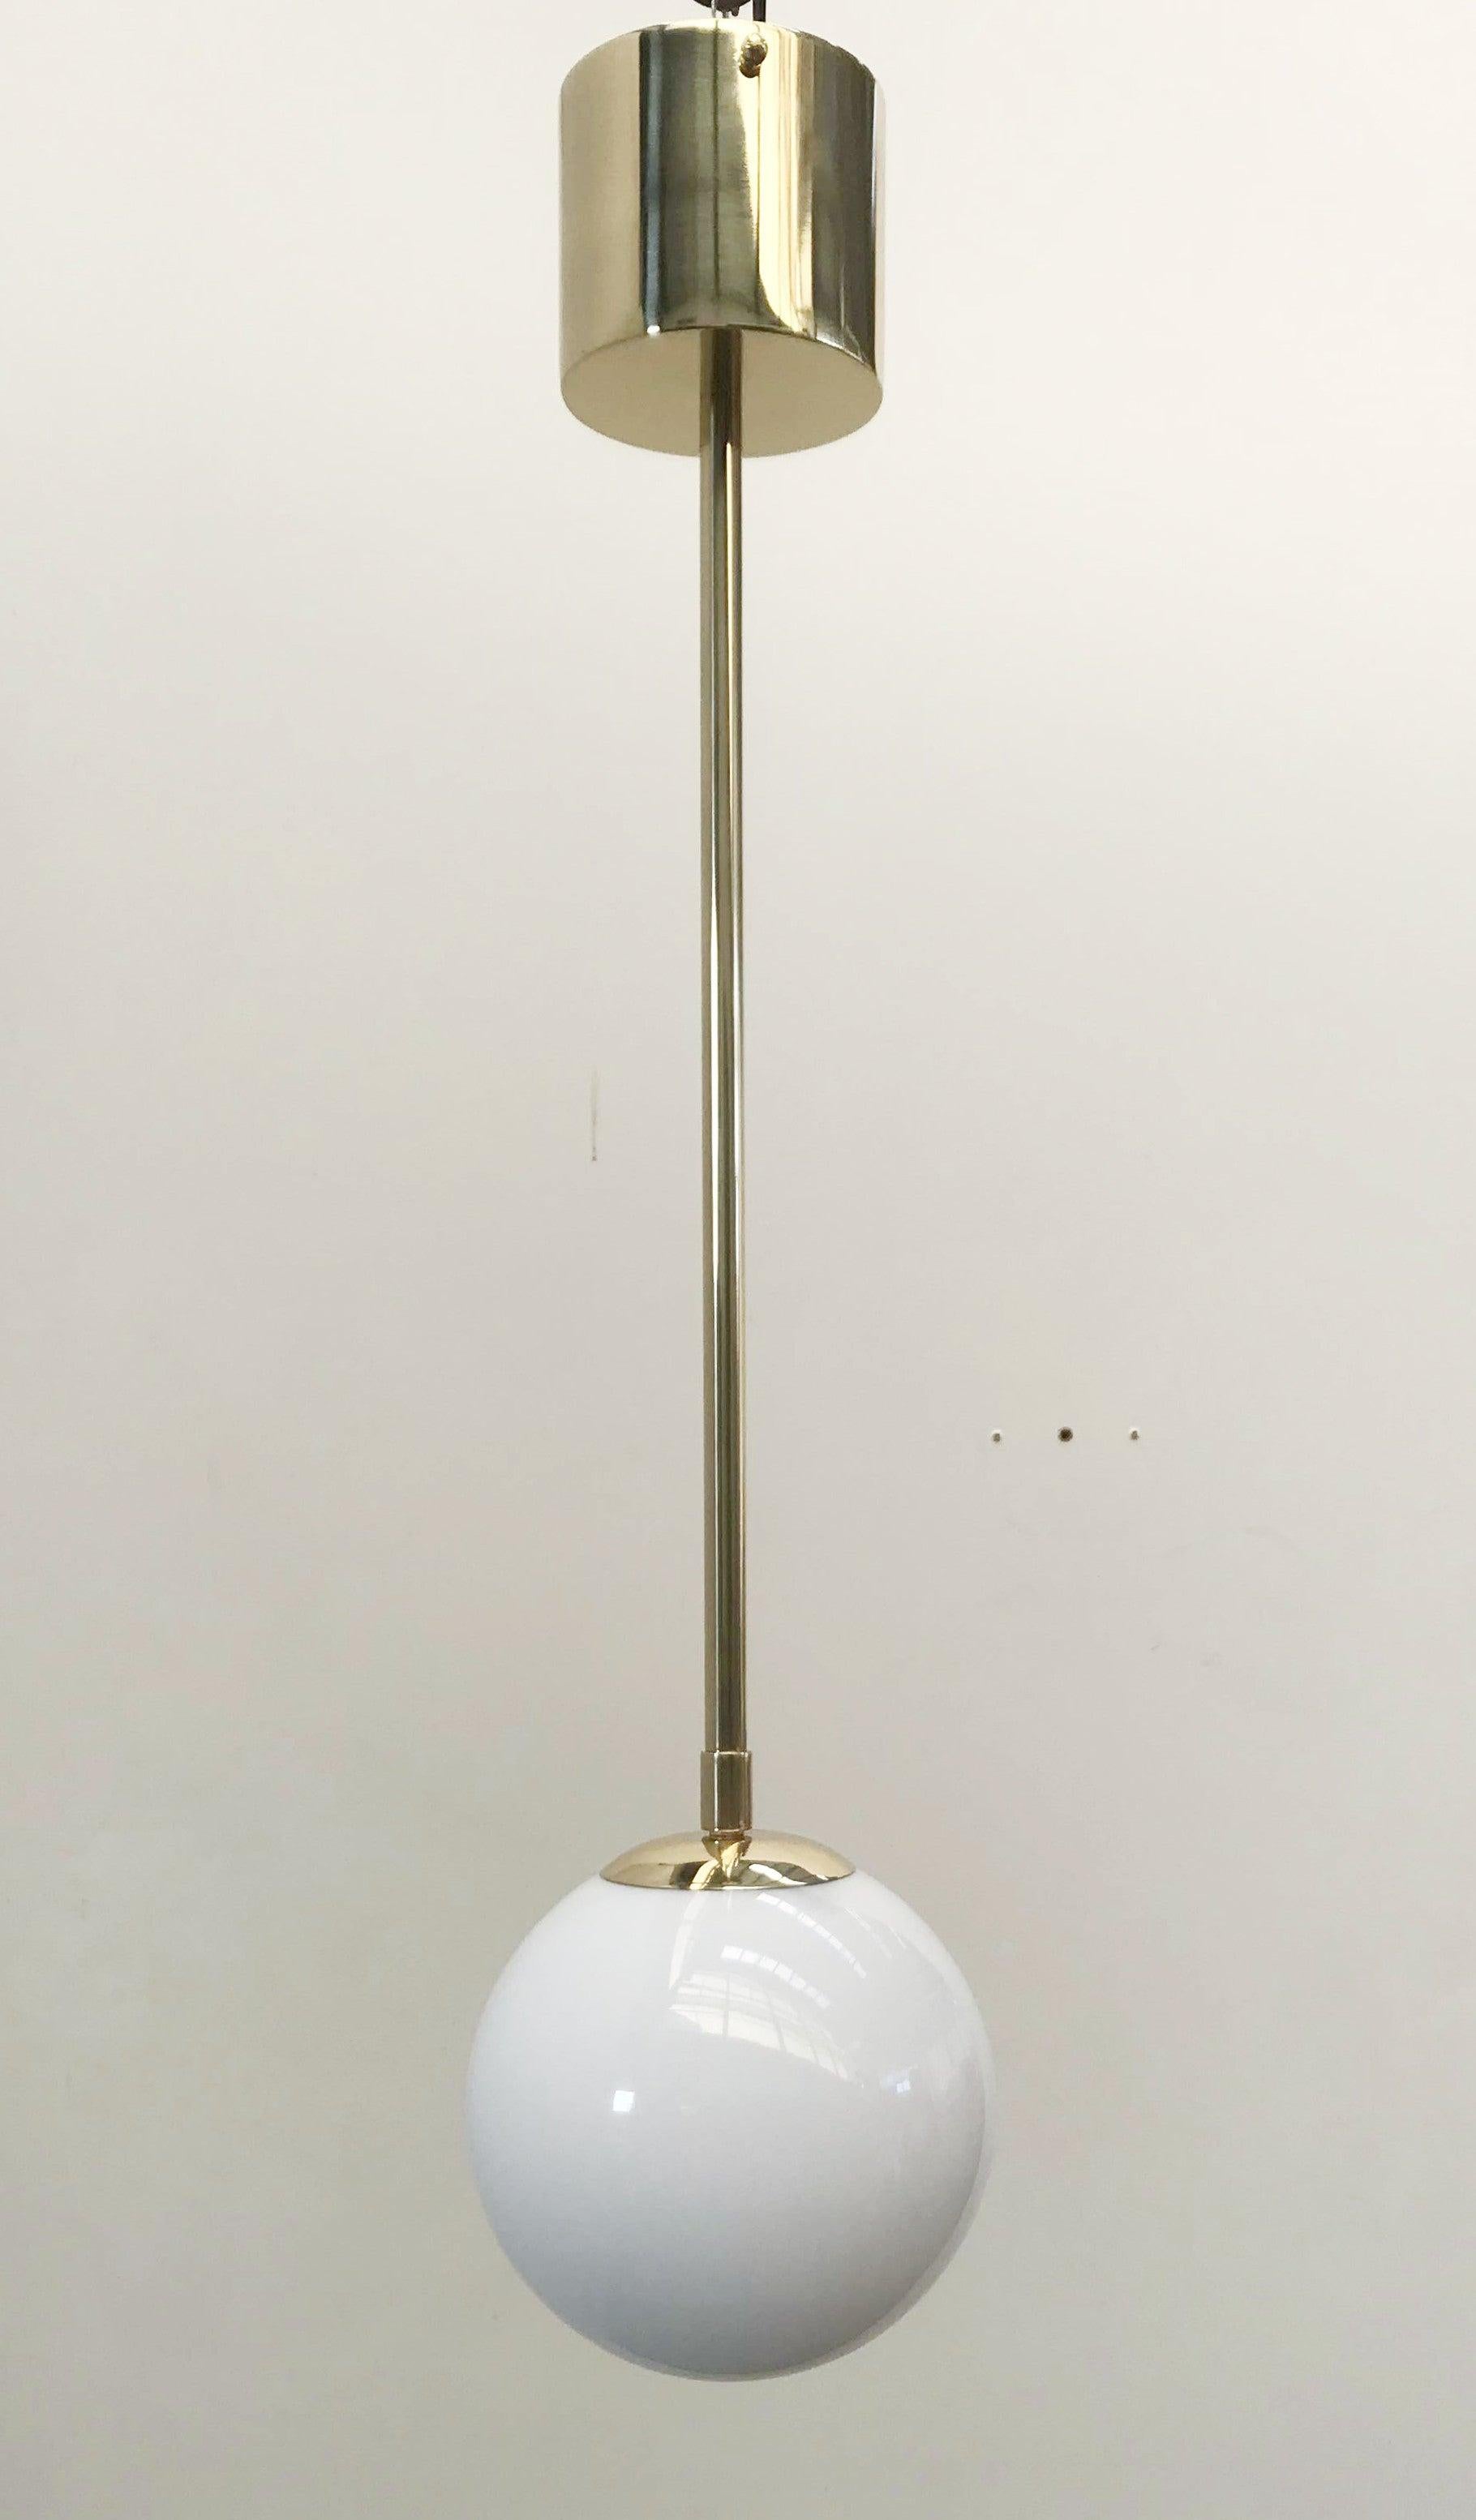 Italian pendant with Murano glass globe mounted on brass frame / Made in Italy

Designed by Fabio Ltd, inspired by Angelo Lelli and Arredoluce styles

1 light / E12 or E14 type / max 40W each

Height: 29.5 inches / Diameter: 8 inches

Order Only /